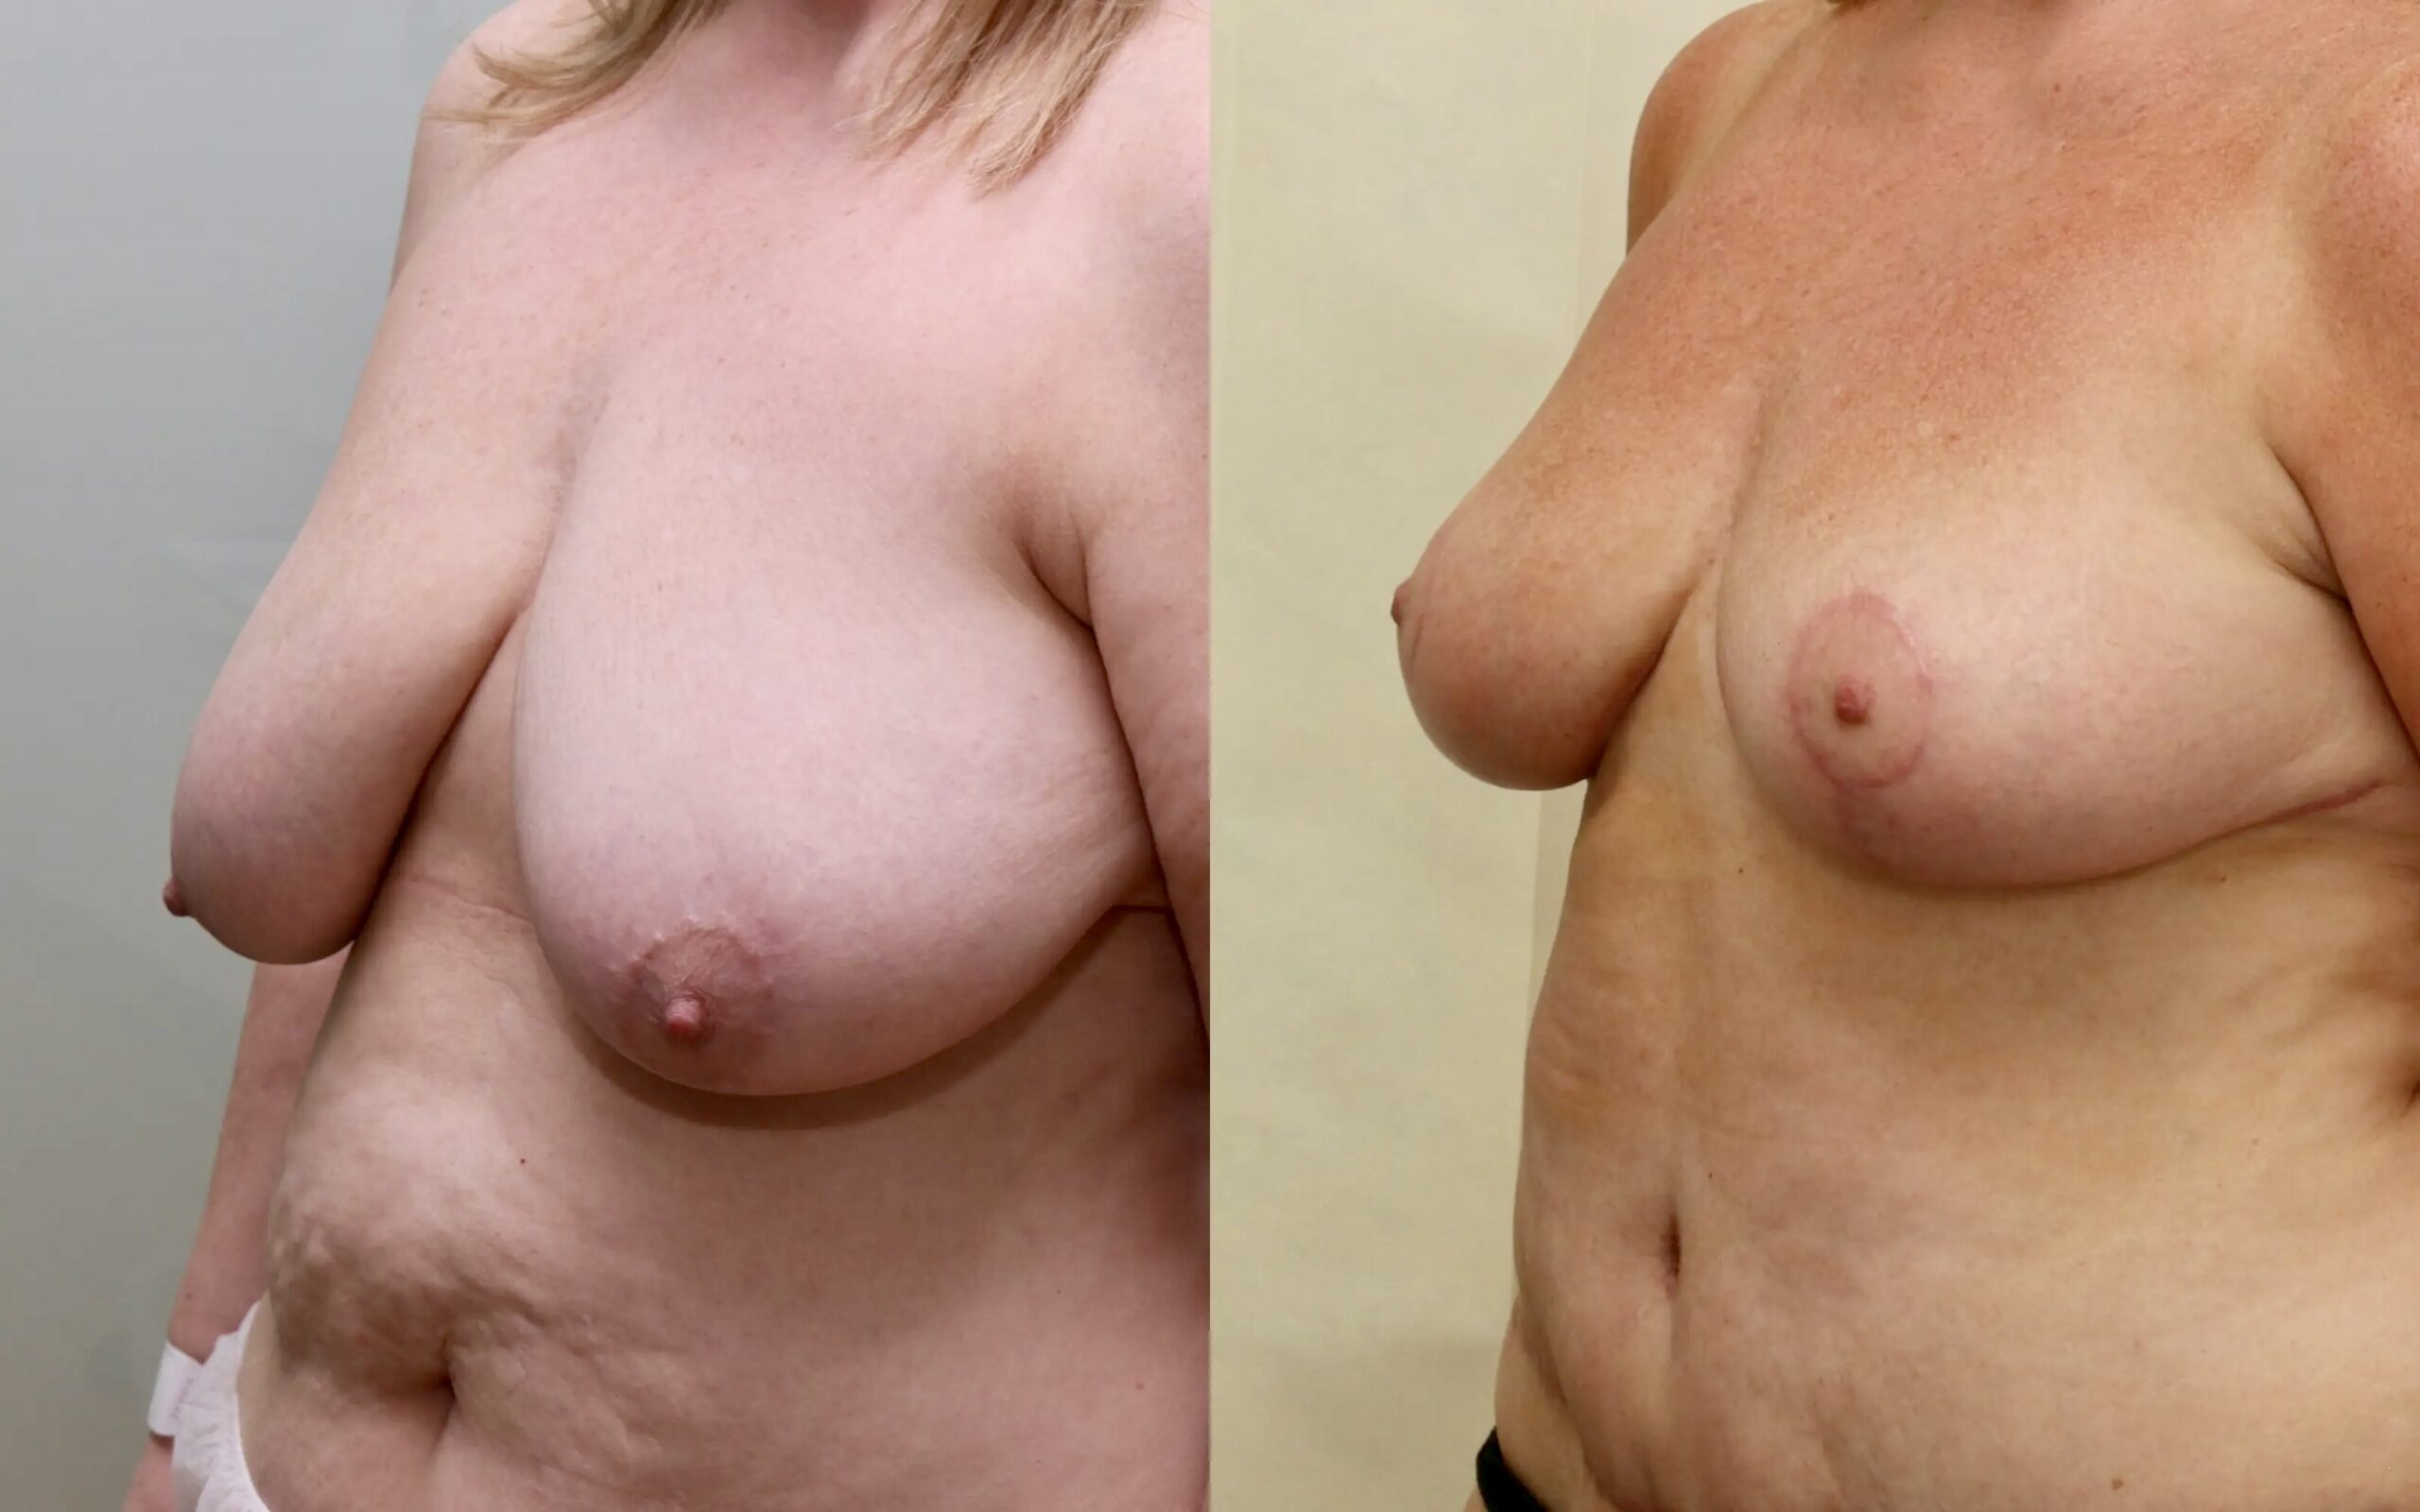 Breast reduction before and after - asymmetry